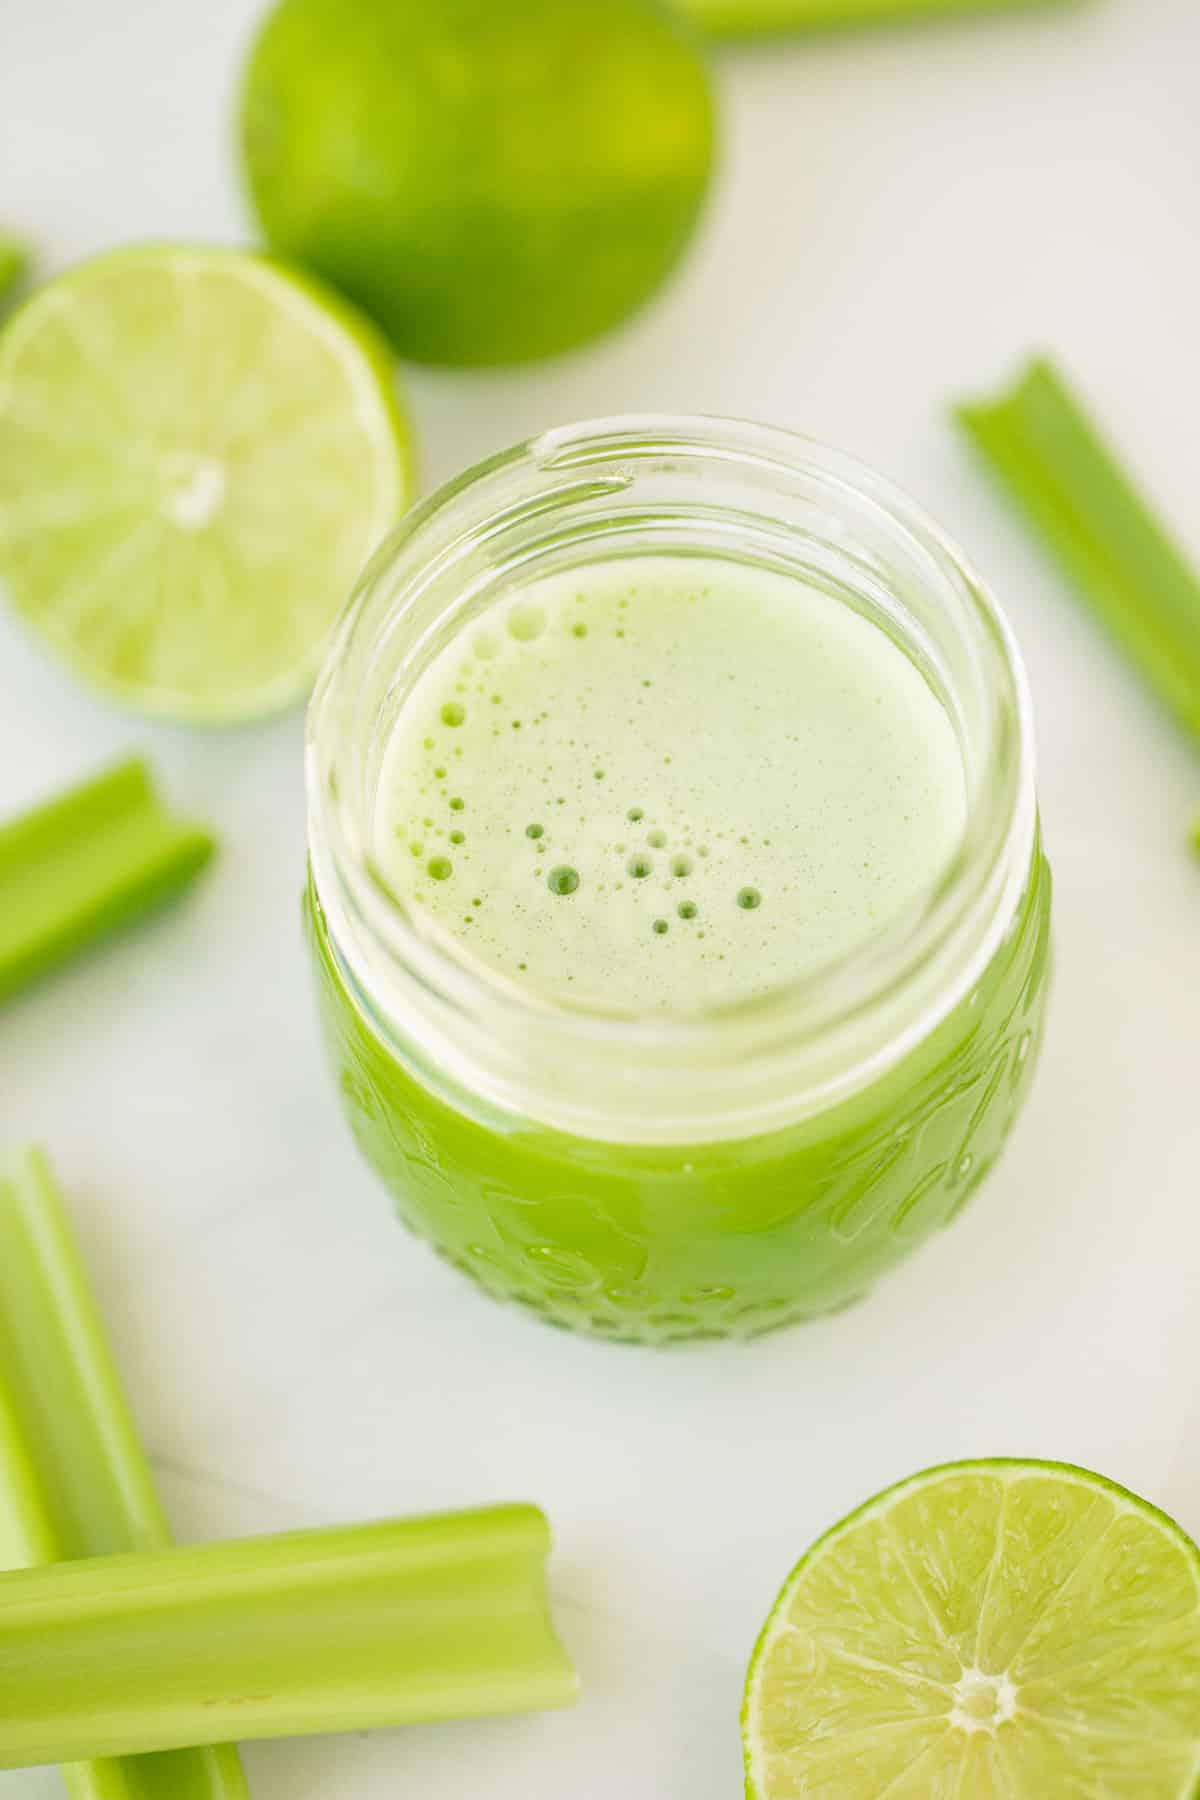 celery juice in a serving glass with white foam on top.